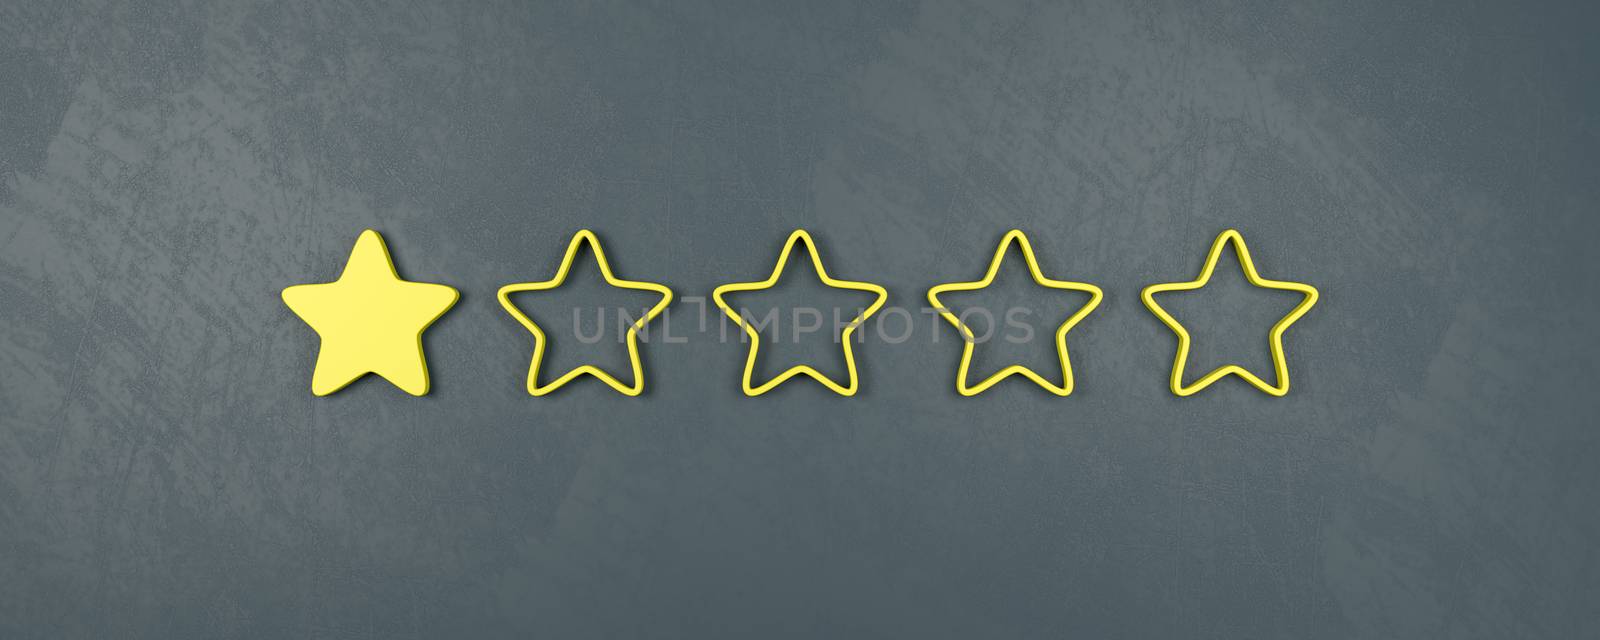 One of Five Yellow Star Shapes 3D Illustration, Very Bad Rating Concepts